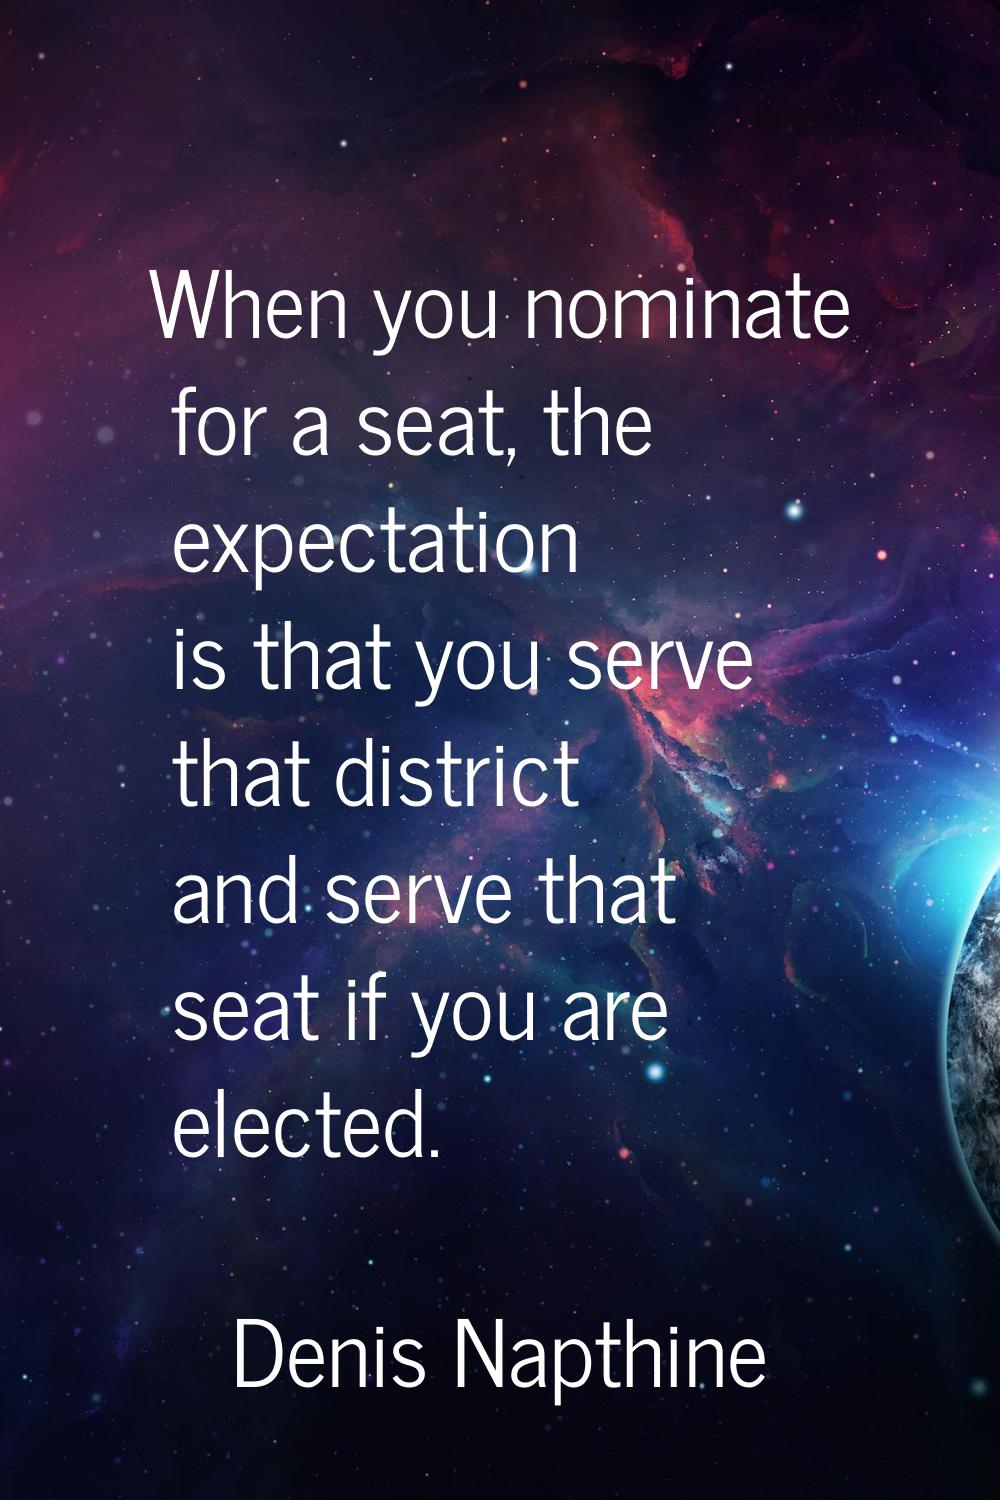 When you nominate for a seat, the expectation is that you serve that district and serve that seat i